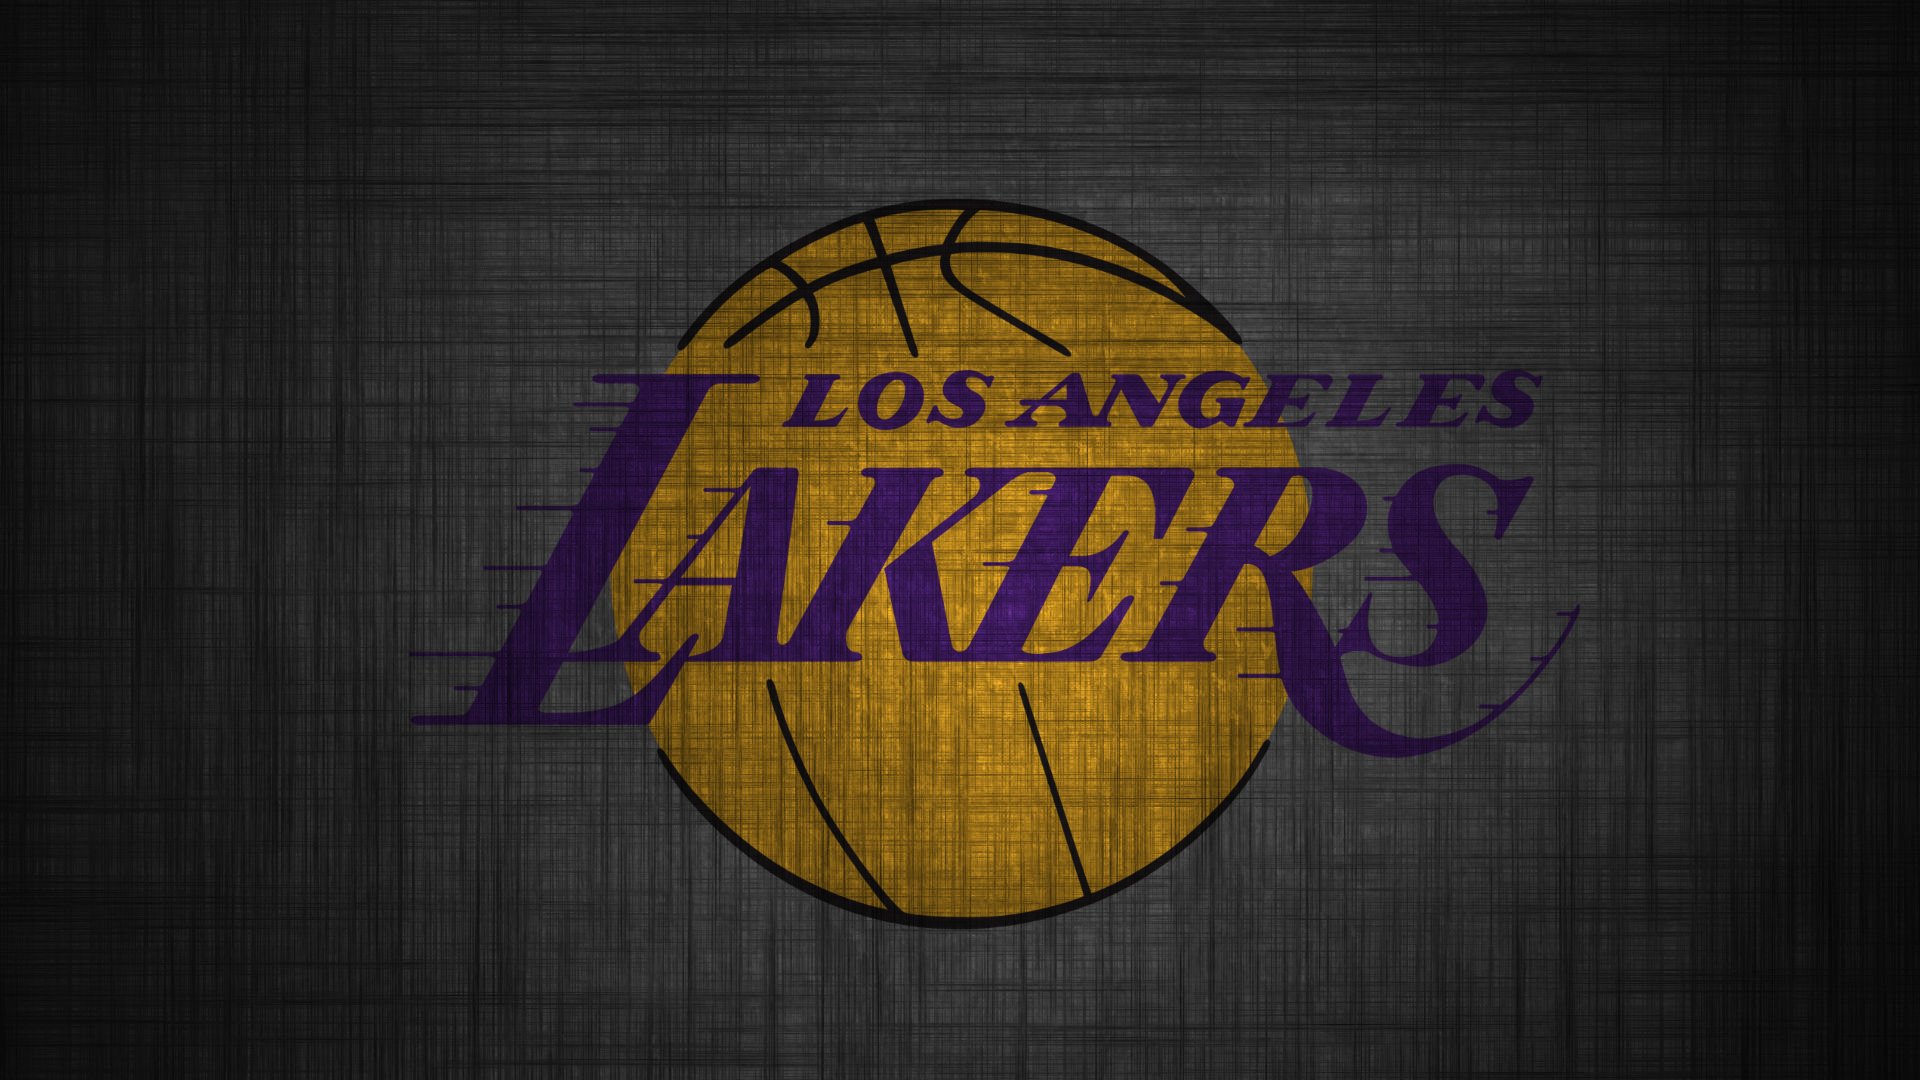 Lakers Wallpaper High Definition